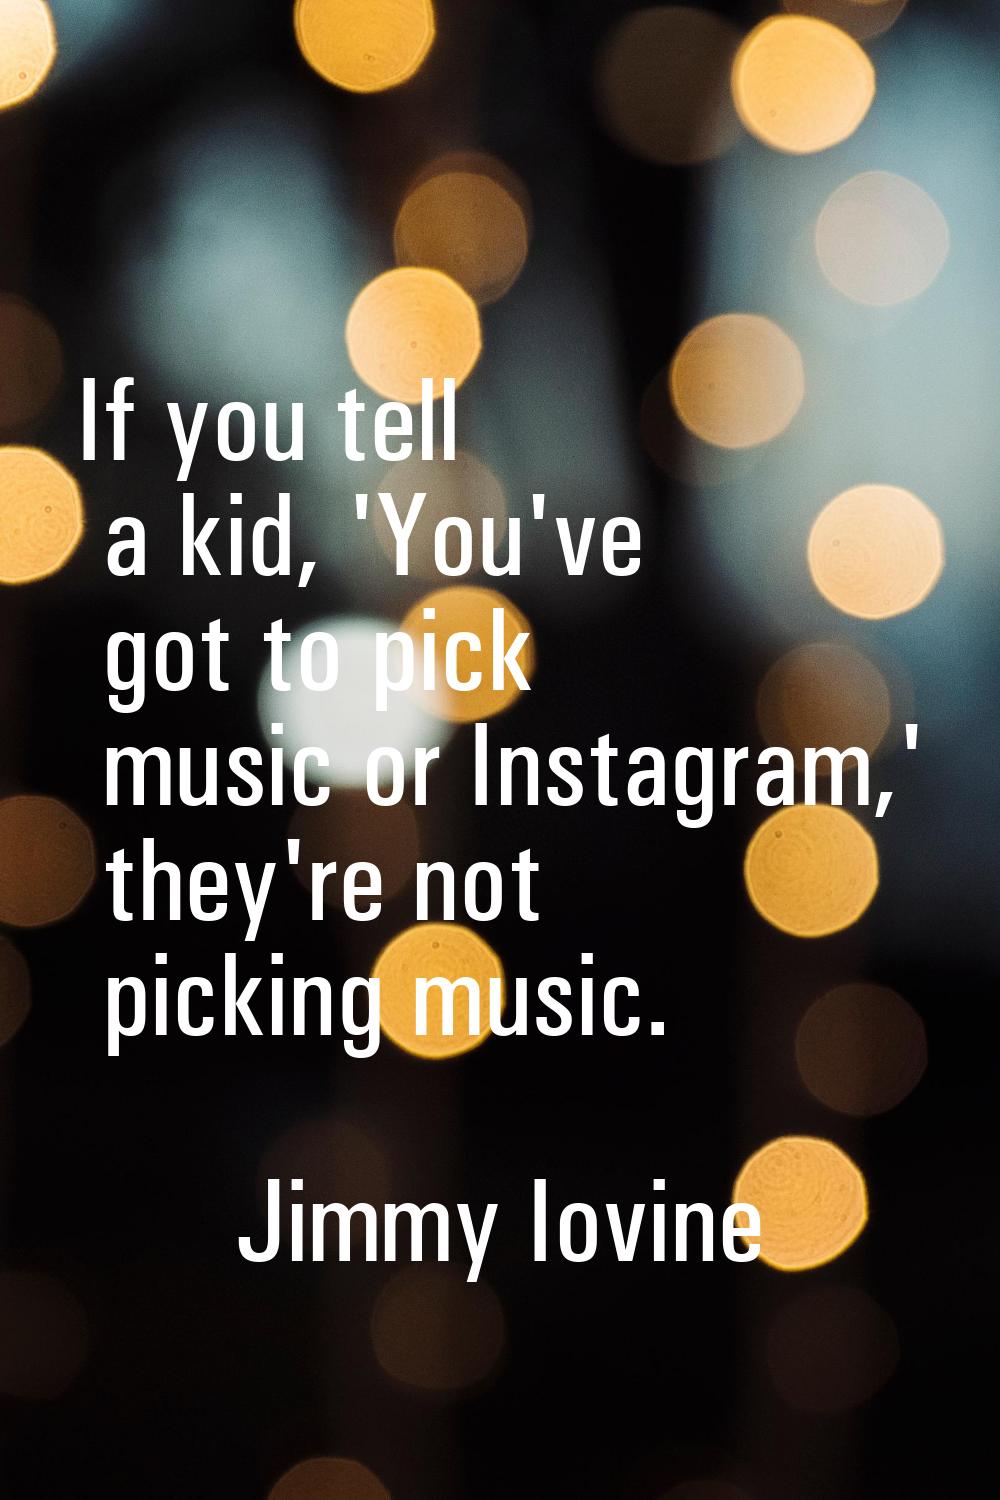 If you tell a kid, 'You've got to pick music or Instagram,' they're not picking music.